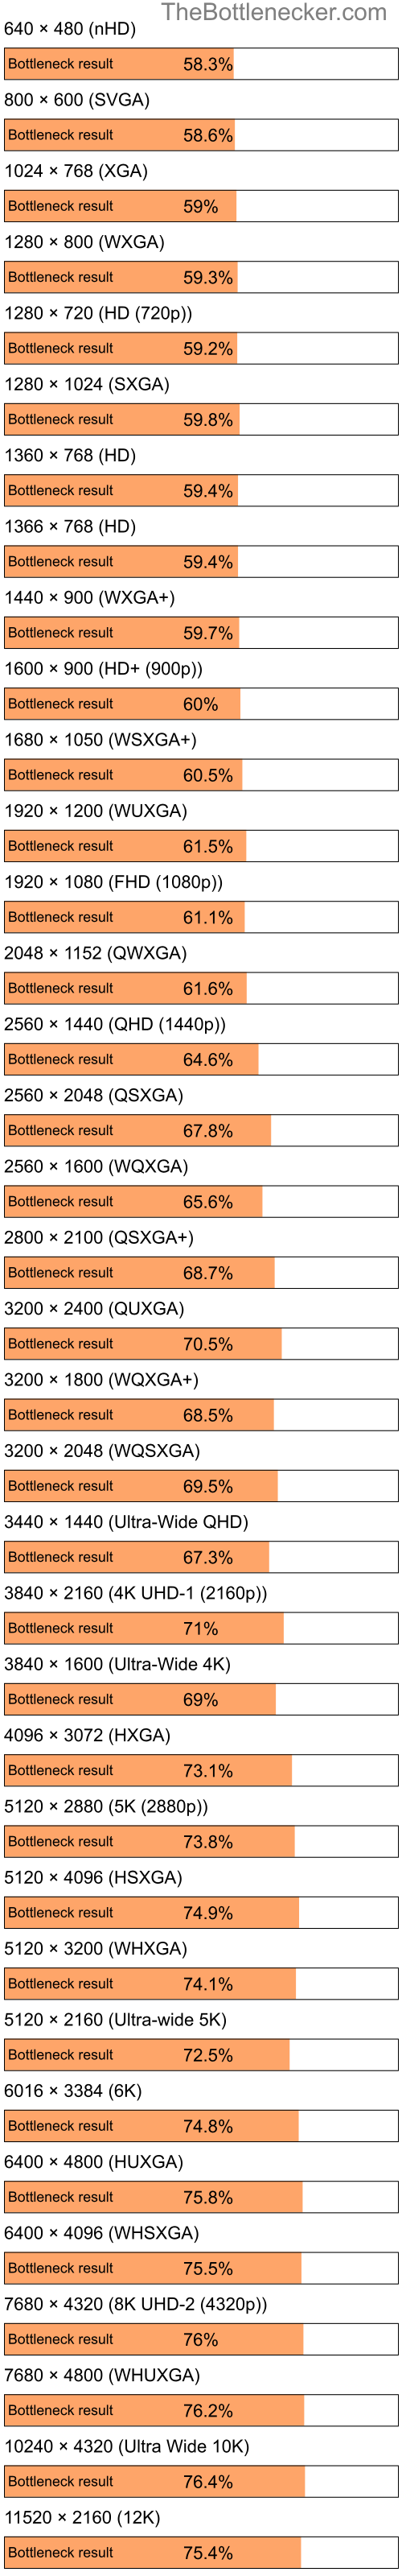 Bottleneck results by resolution for Intel Pentium 4 and AMD Radeon HD 2350 in Processor Intense Tasks